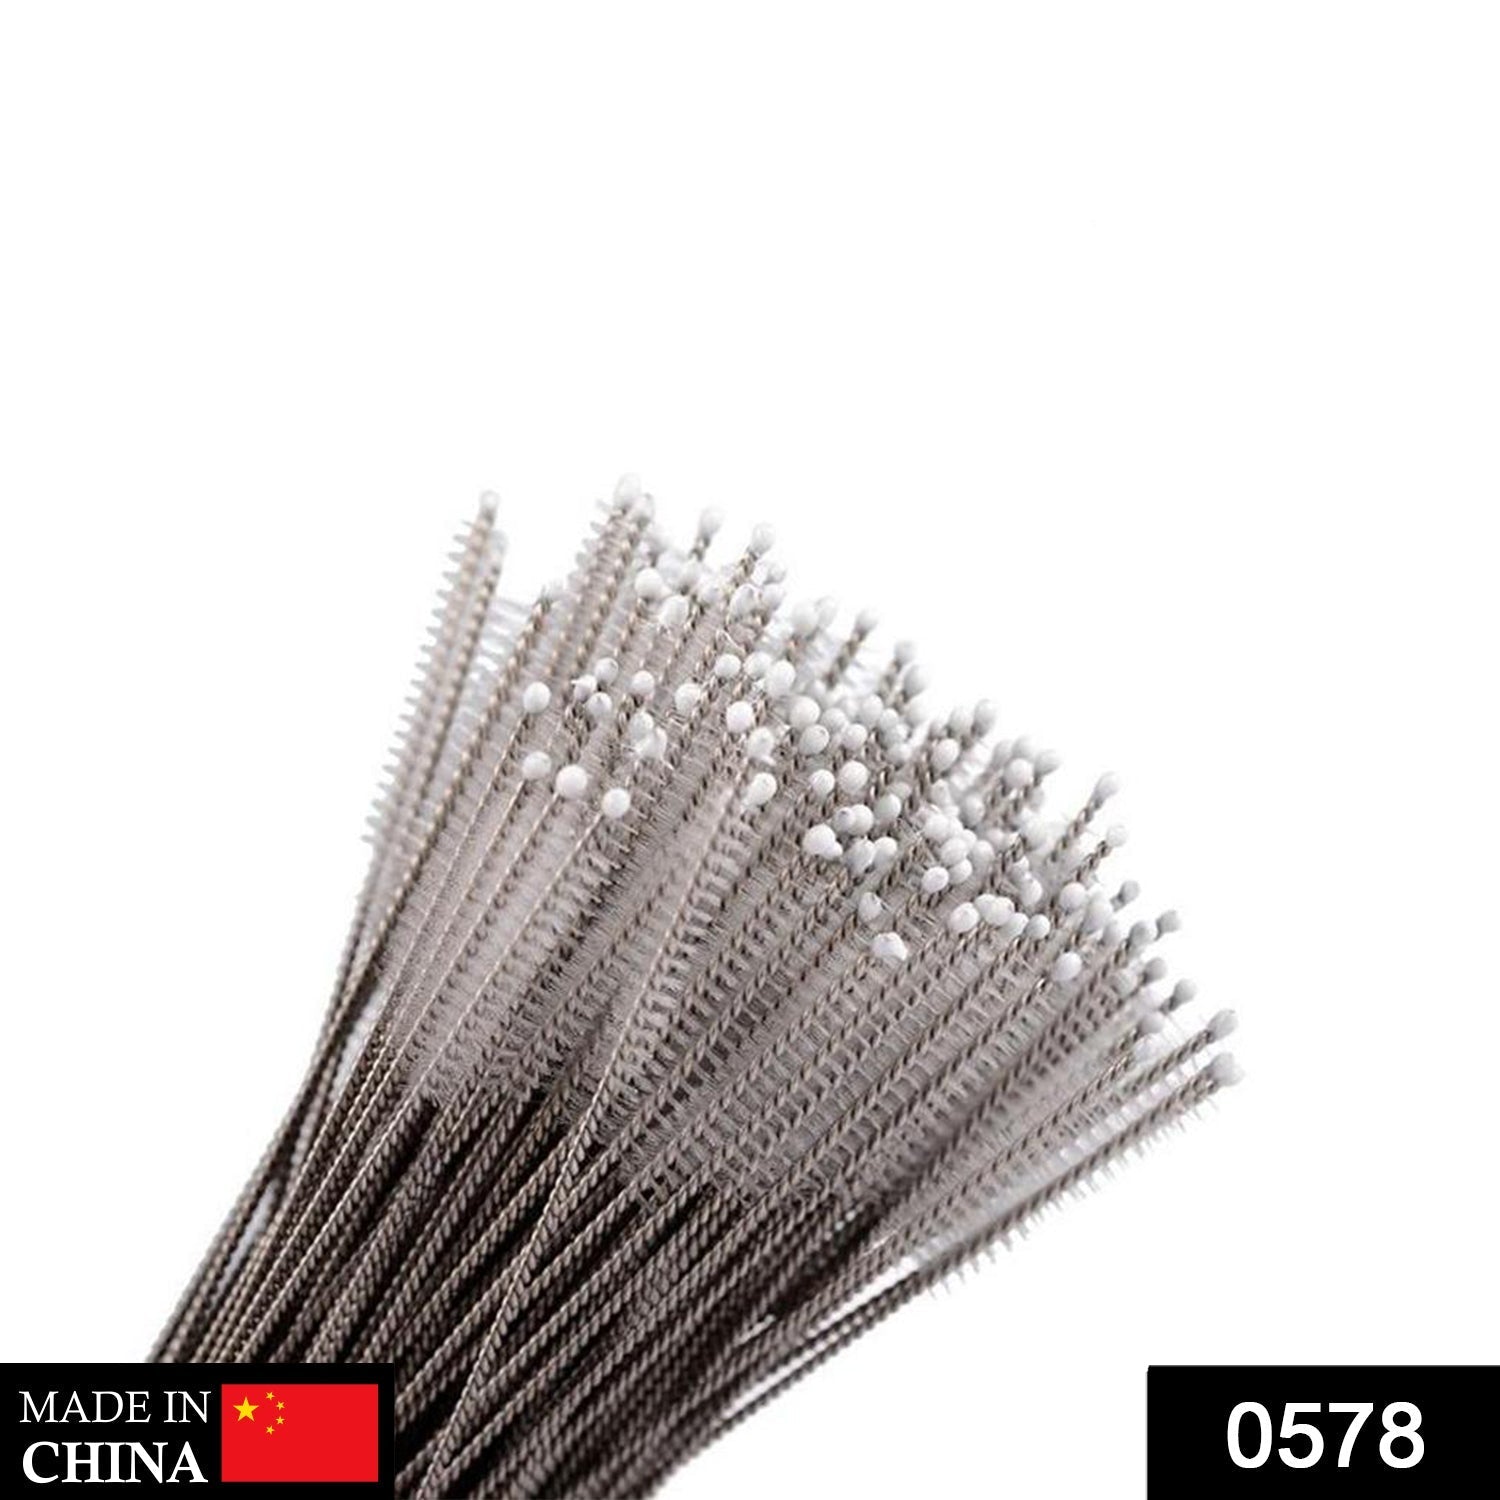 578 Stainless Steel Straw Cleaning Brush Drinking Pipe, 23mm 1 pcs 